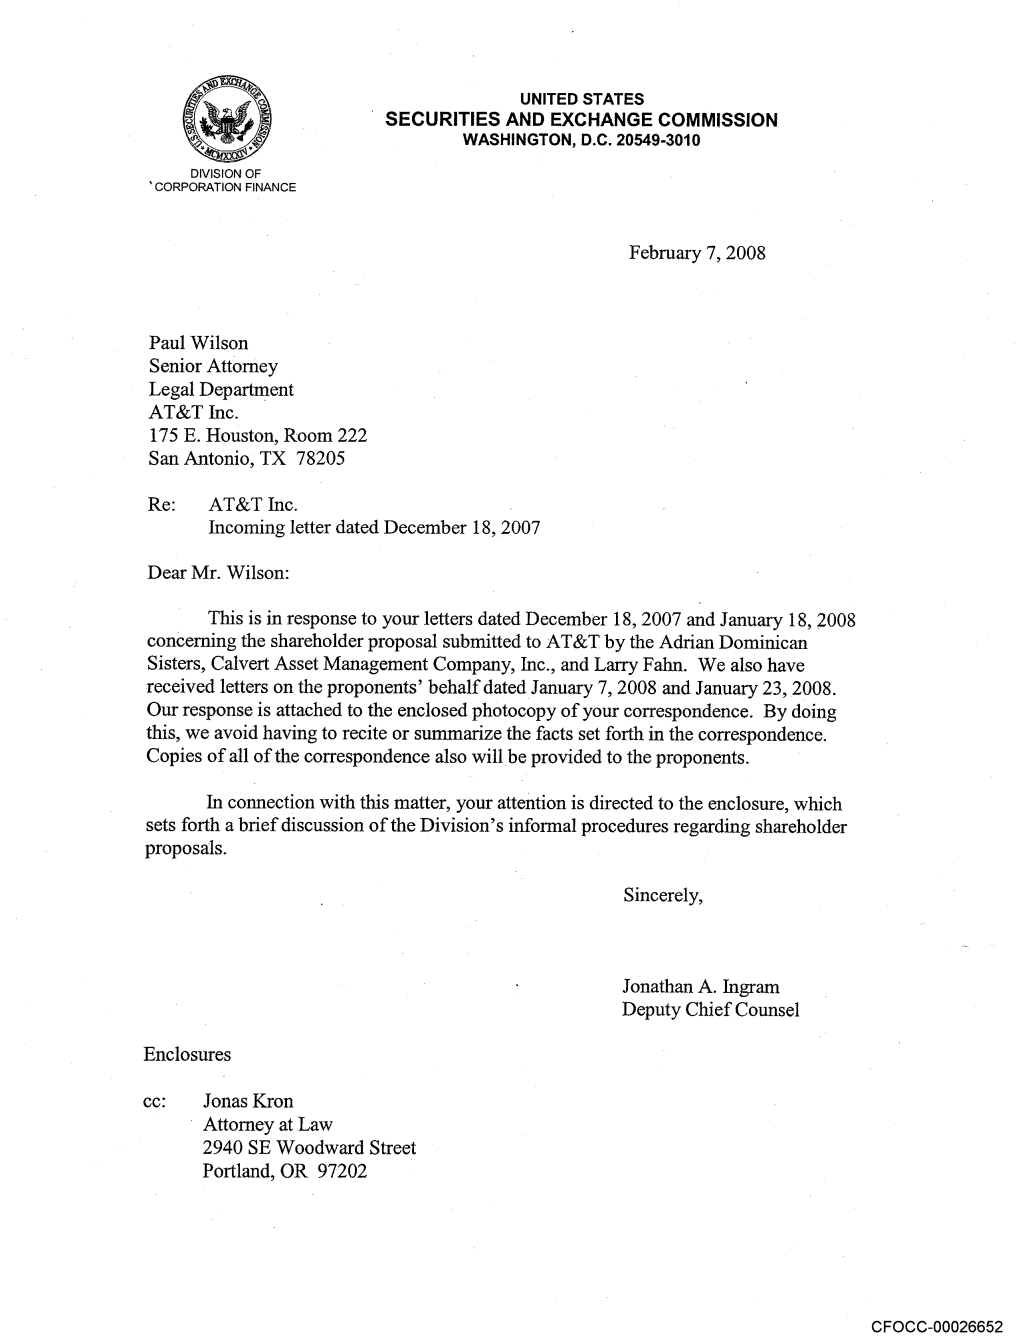 AT&T Inc.; February 7, 2008; Rule 14A-8 No-Action Letter